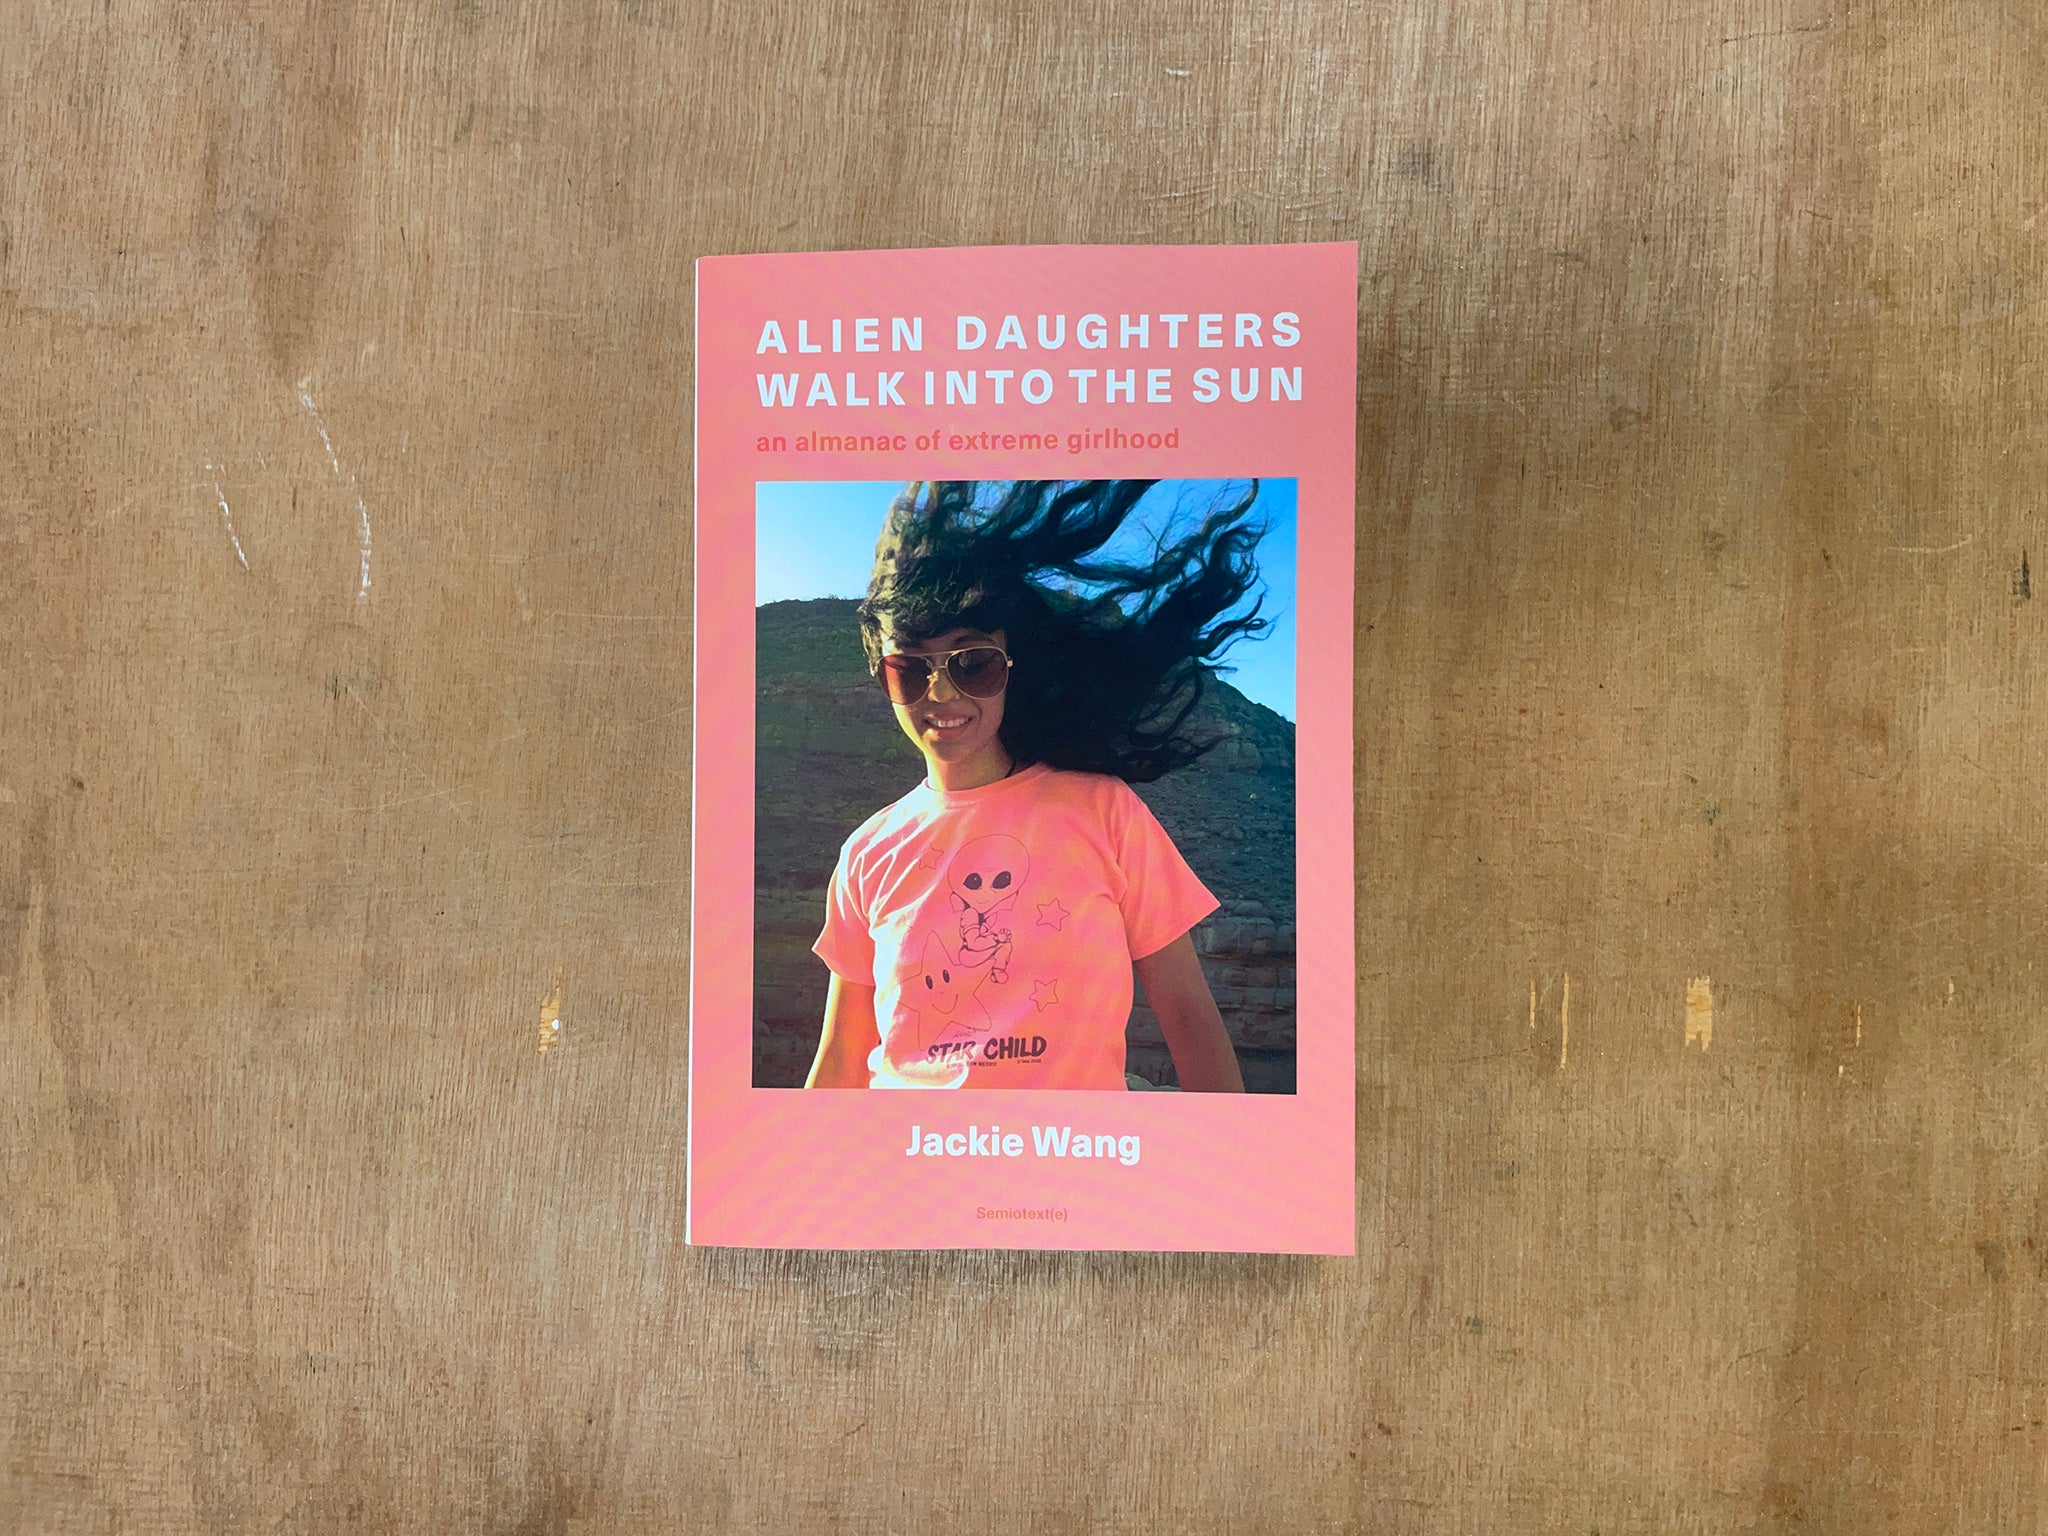 ALIEN DAUGHTERS WALK INTO THE SUN: AN ALMANAC OF EXTREME GIRLHOOD by Jackie Wang